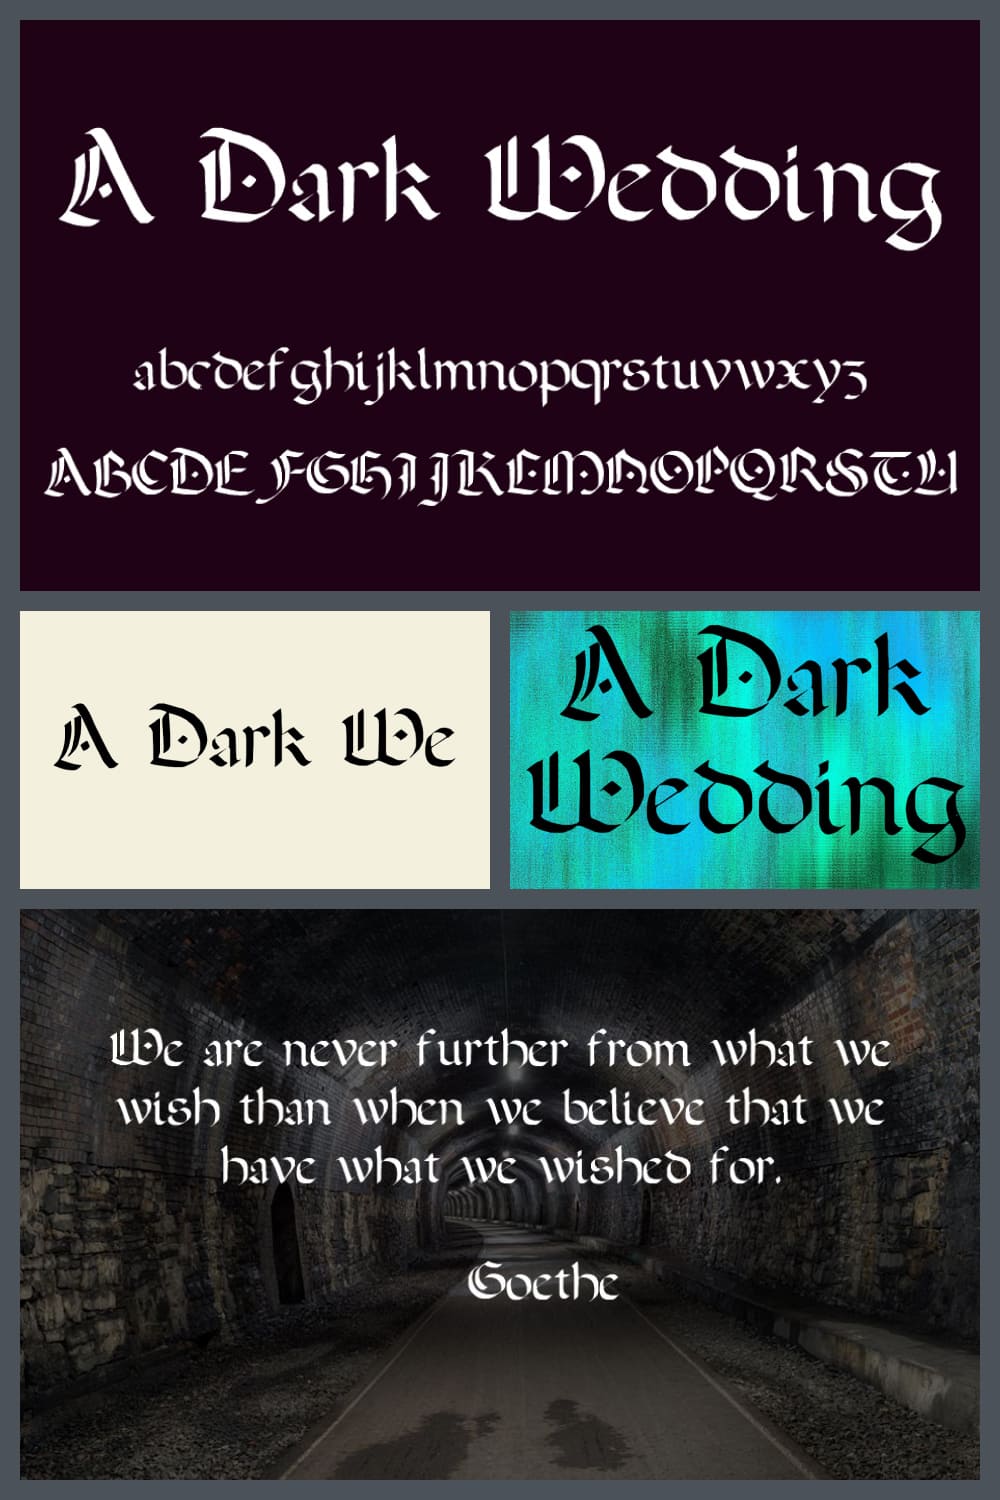 Gothic font style for old books.